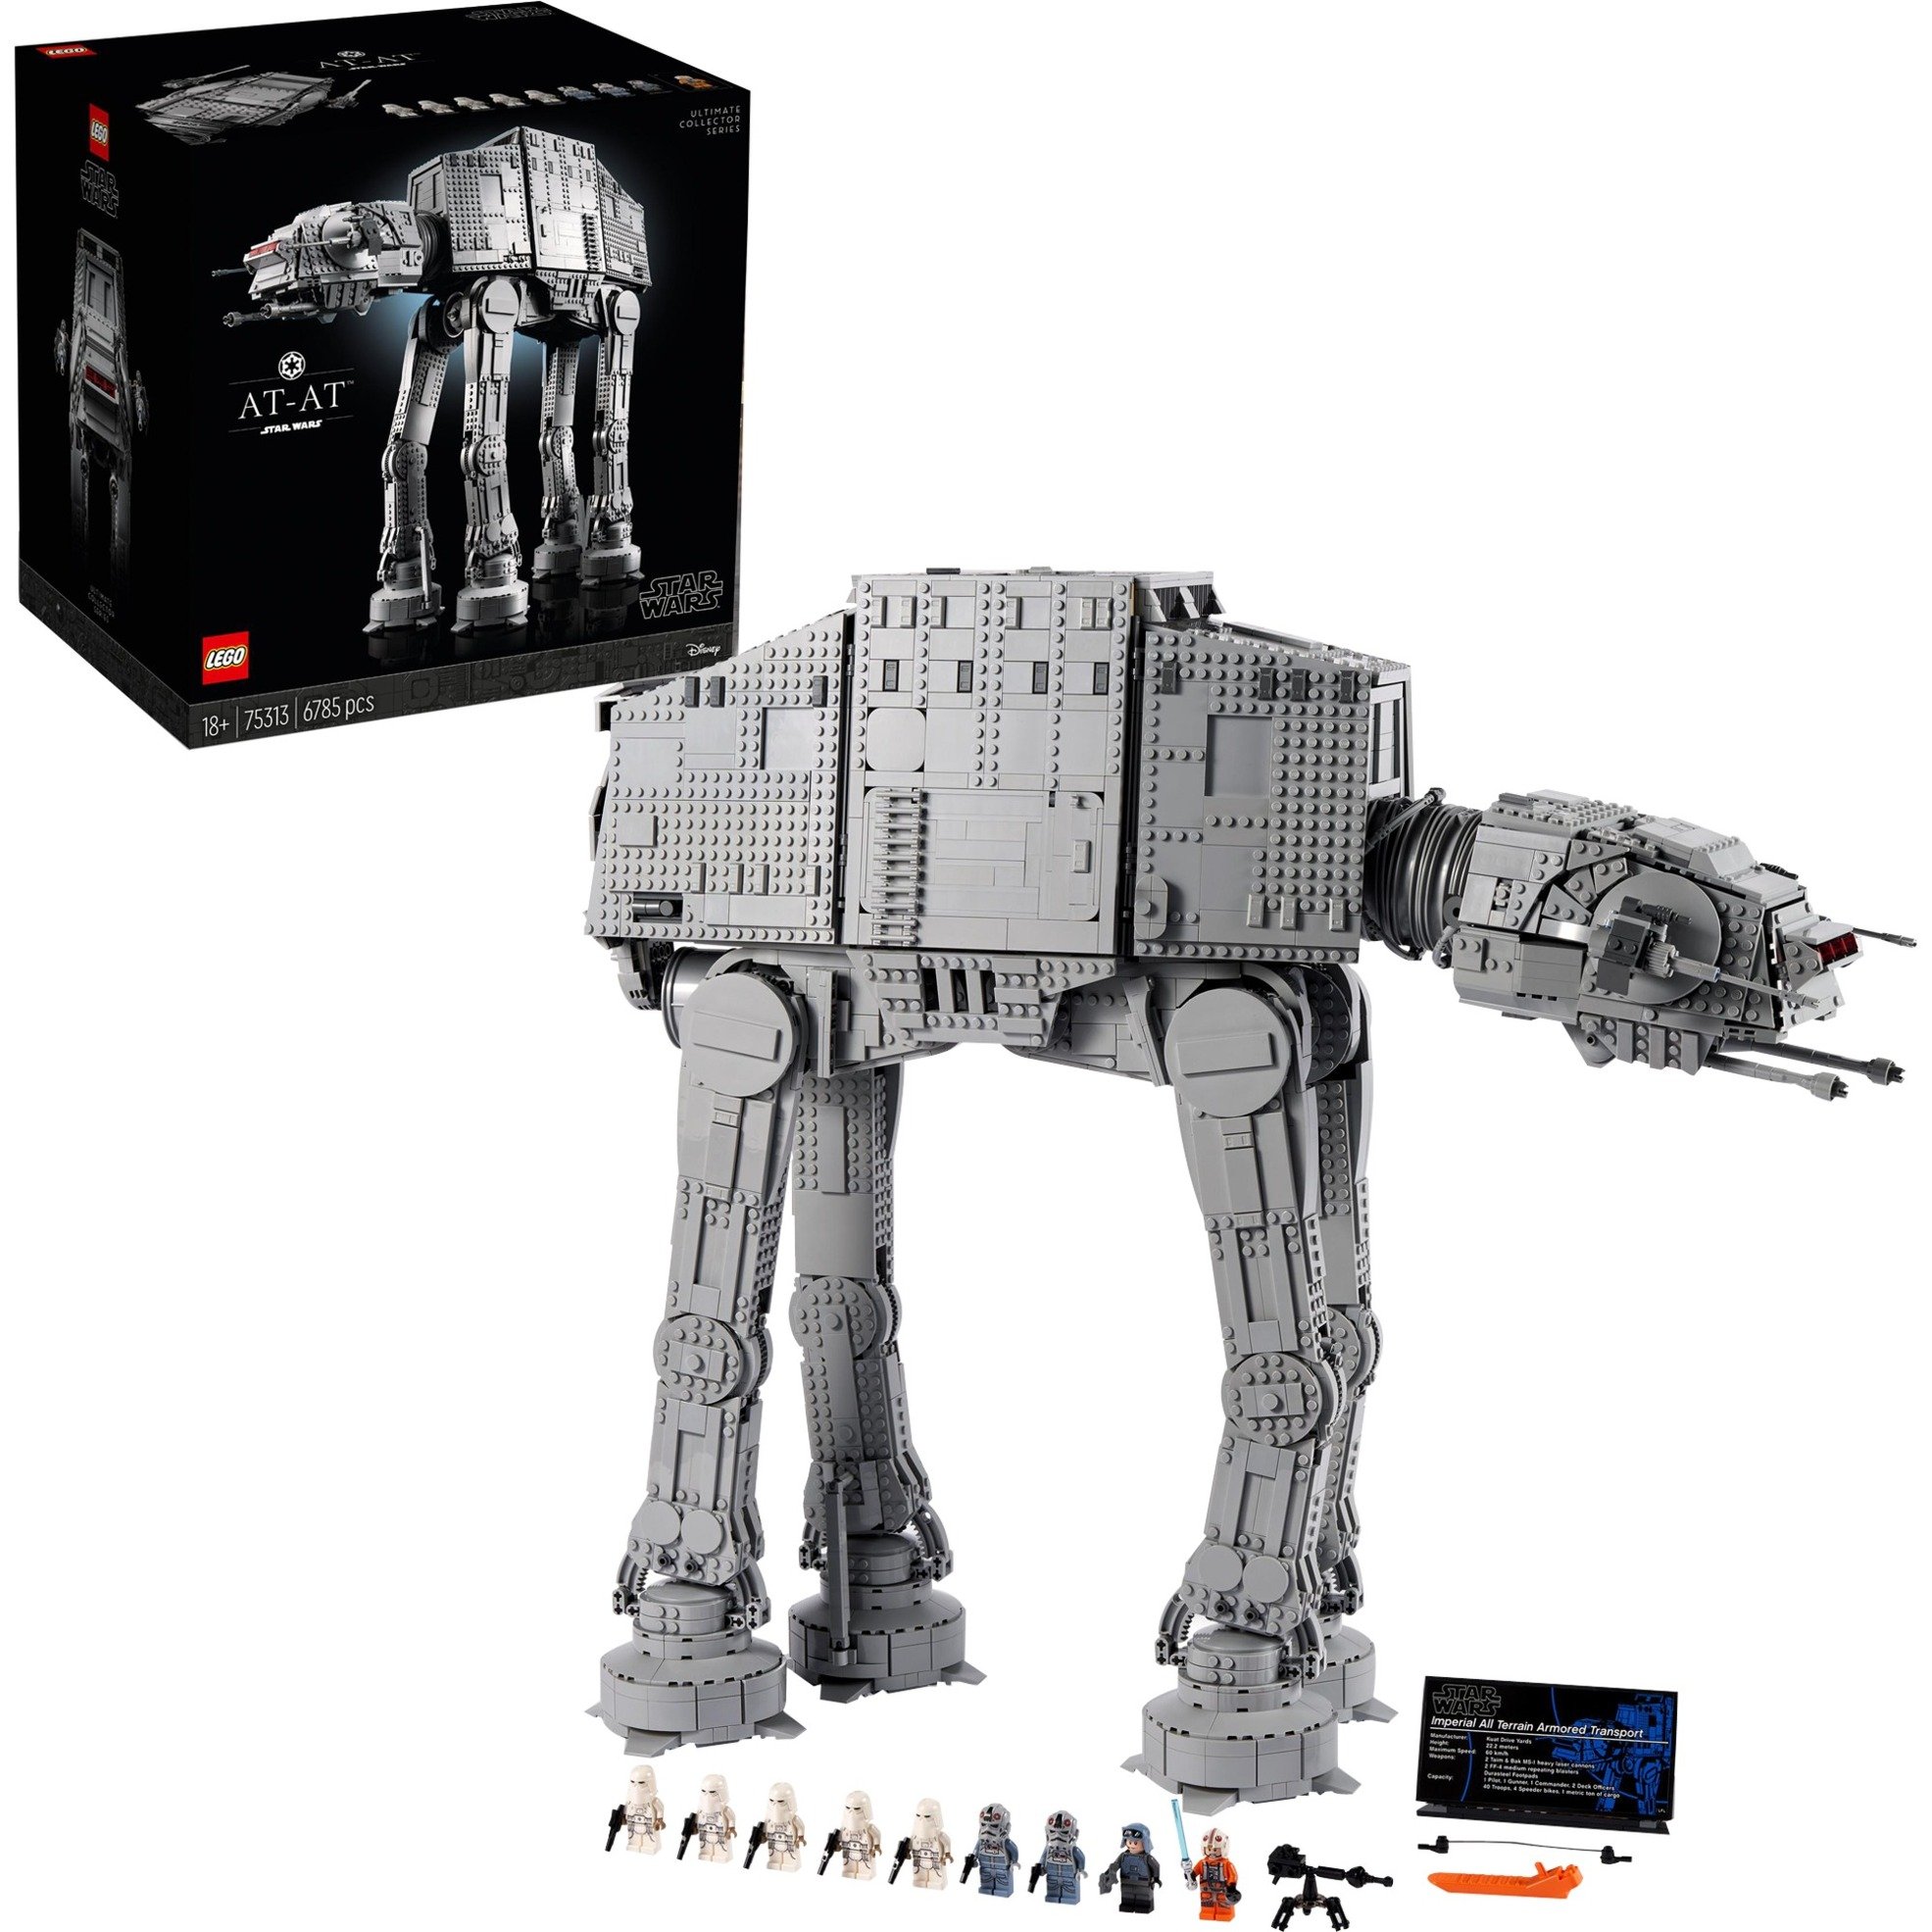 Spielzeug: Lego 75313 Star Wars AT-AT